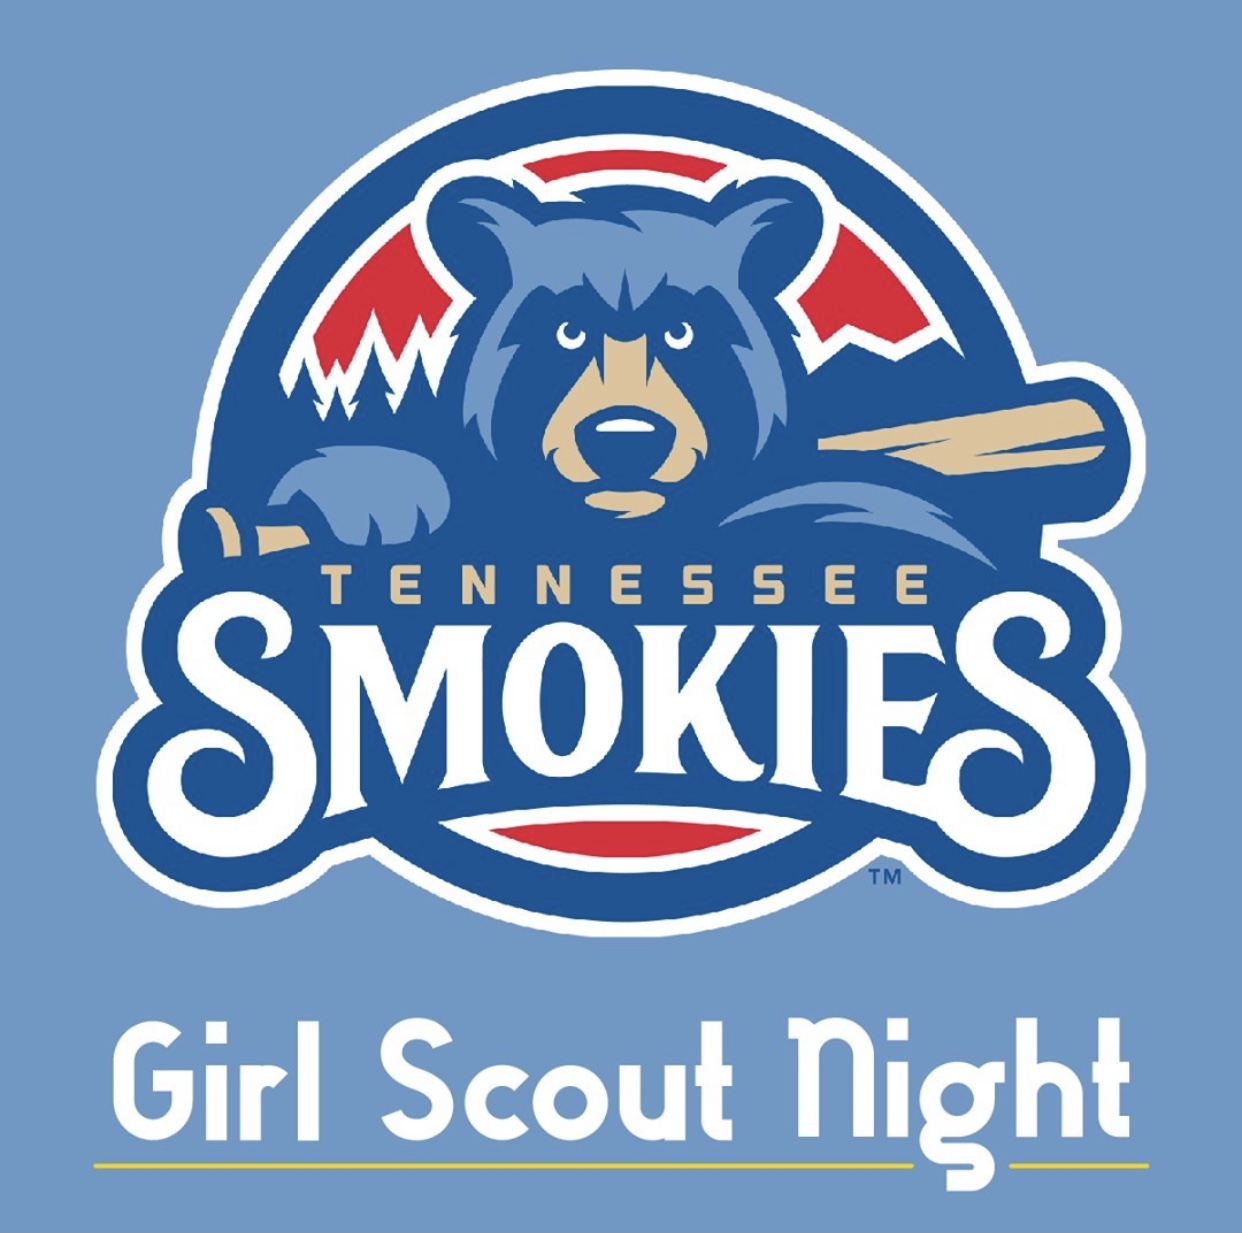 Featured image for “Smokies Stadium to host Girl Scouts Night on June 23”